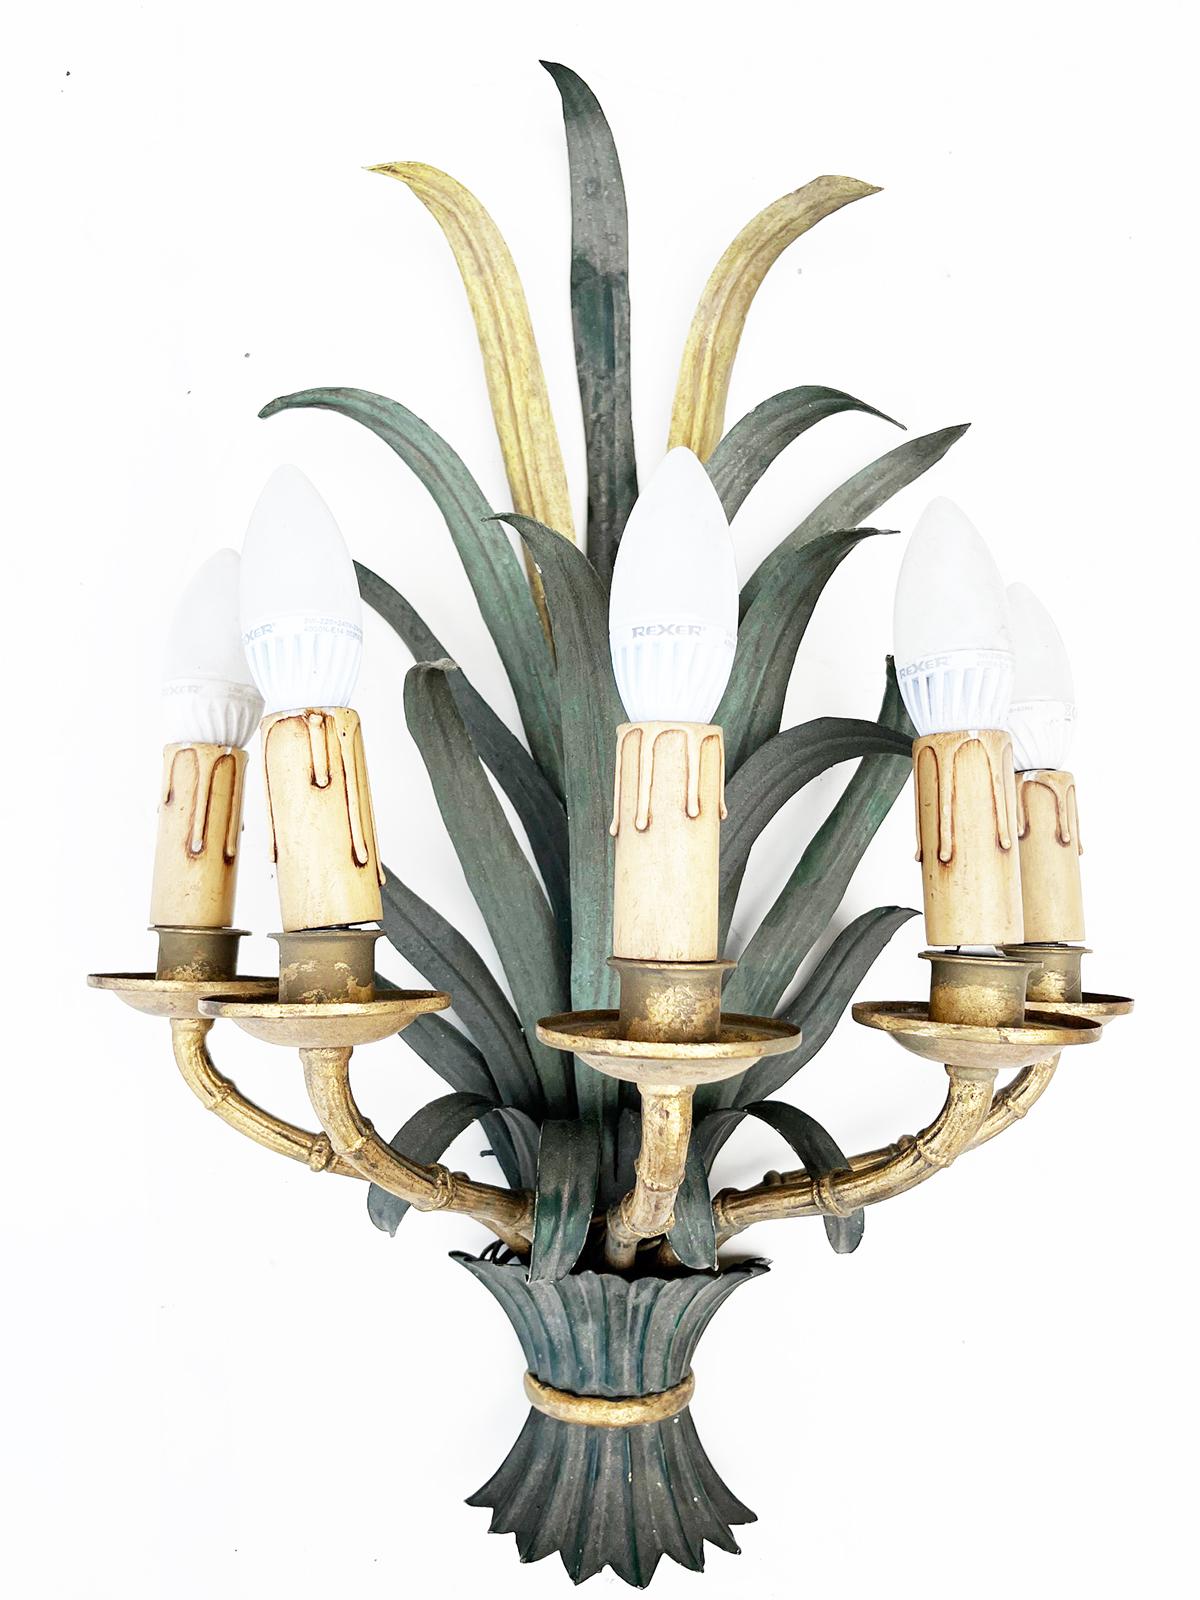 Hollywood Regency wall sconce early 20th century -Antiques-

Anno: Primo '900

Materials: Wrought Iron Decorated Gold and Green, 5 lights 

Condition: Good, Functional 

Measurements: Cm 60 H x cm 45 W x cm 15 D

 

Early 1900s Hollywood